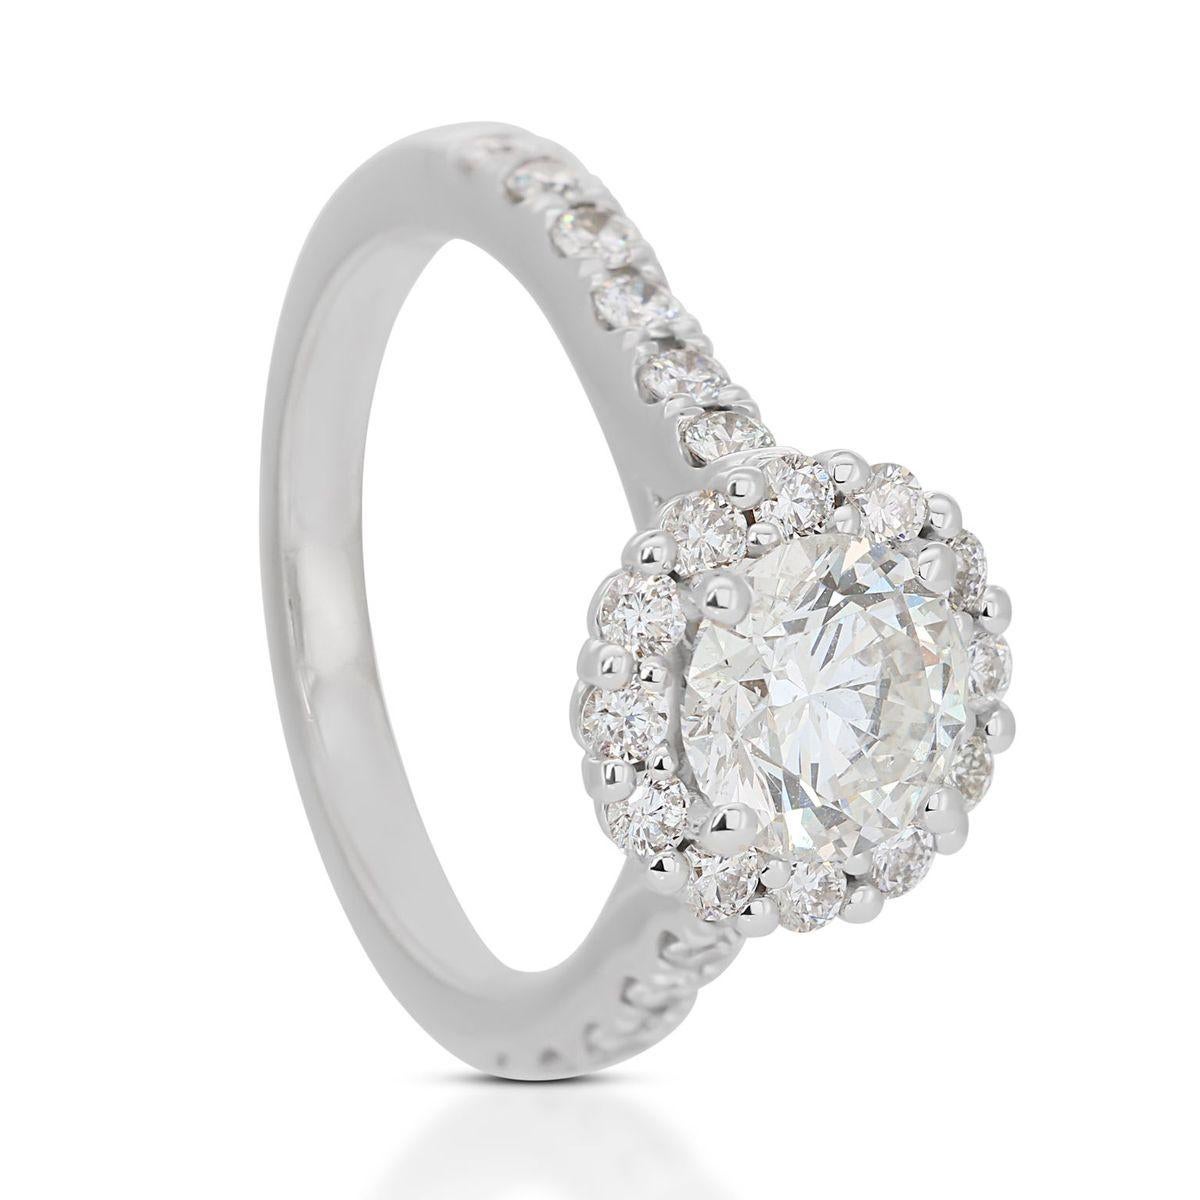 Sophisticated 14k White Gold Halo Ring w/ 1.43 Carat Natural Diamonds 2